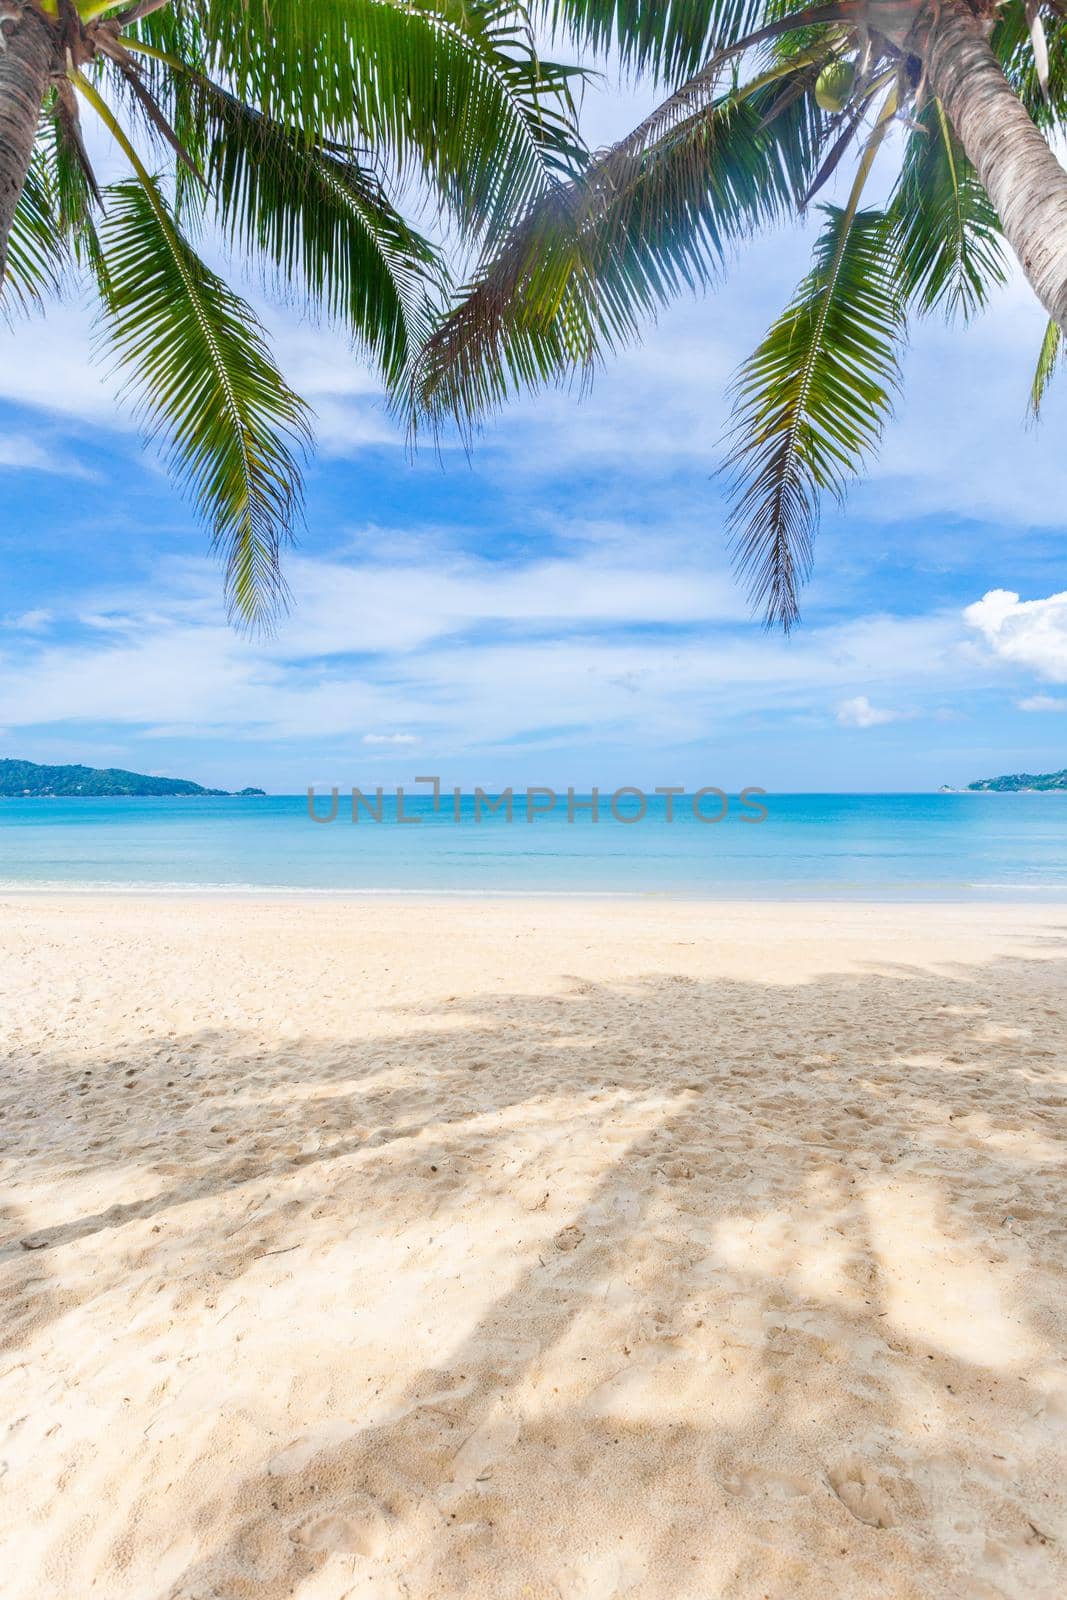 Patong beach in Phuket, Thailand. Phuket is a popular destination famous for its beaches.